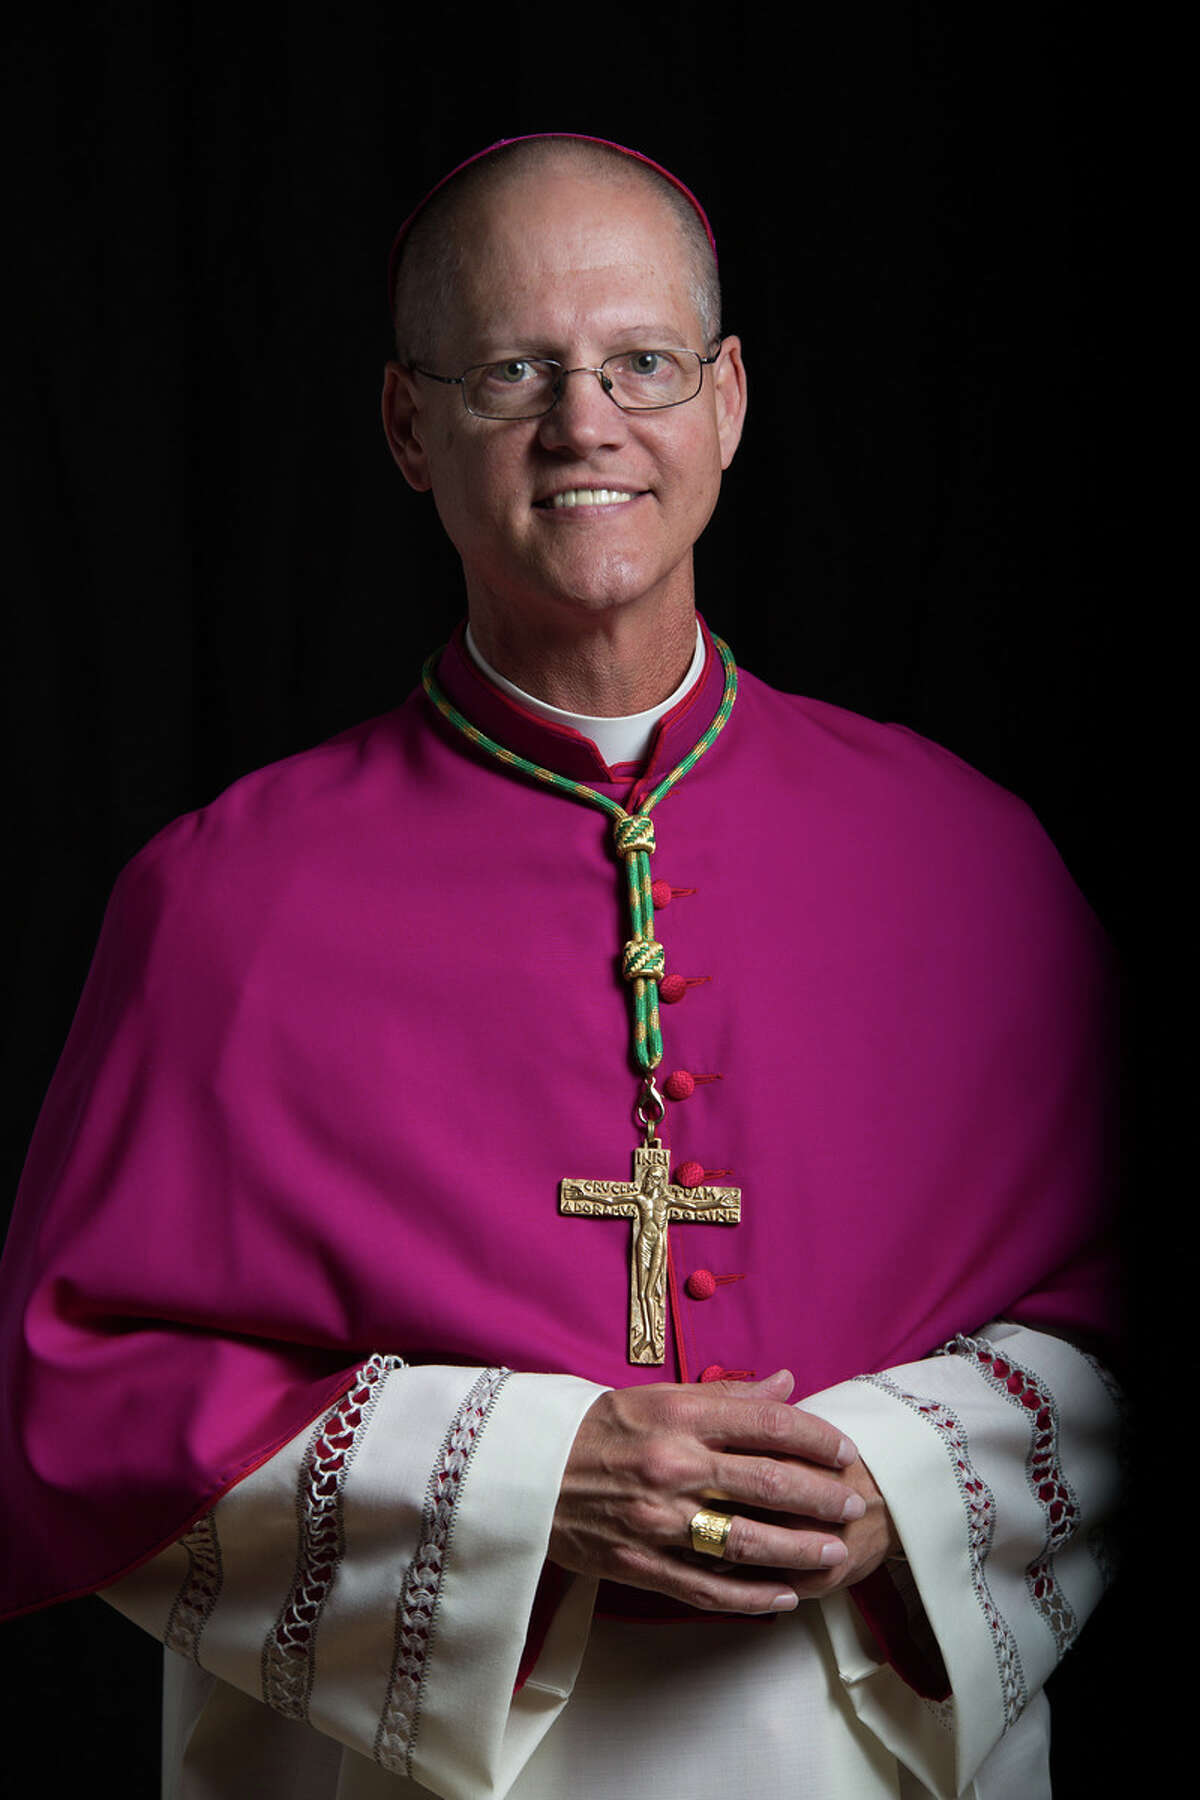 Archbishop Paul Etienne:  "I'm here to assure all of our people of my ongoing commitment to make sure that these crimes and these sins no longer occur within the church."